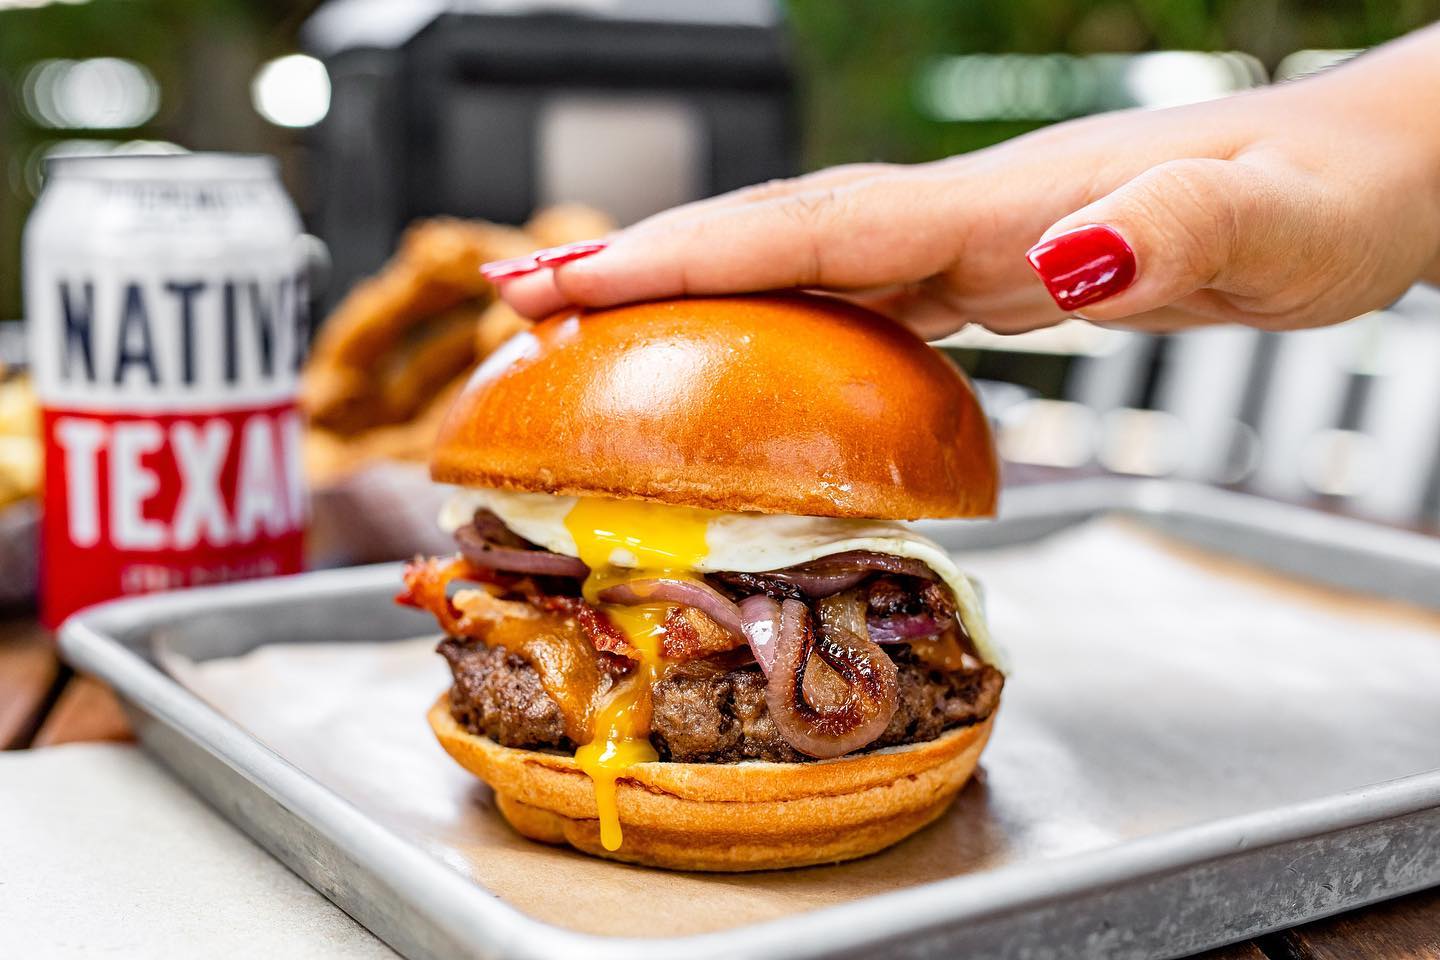 A manicured hand with long red nails resting on the top bun of a burger loaded with sauteed onions, bacon and a fried egg.